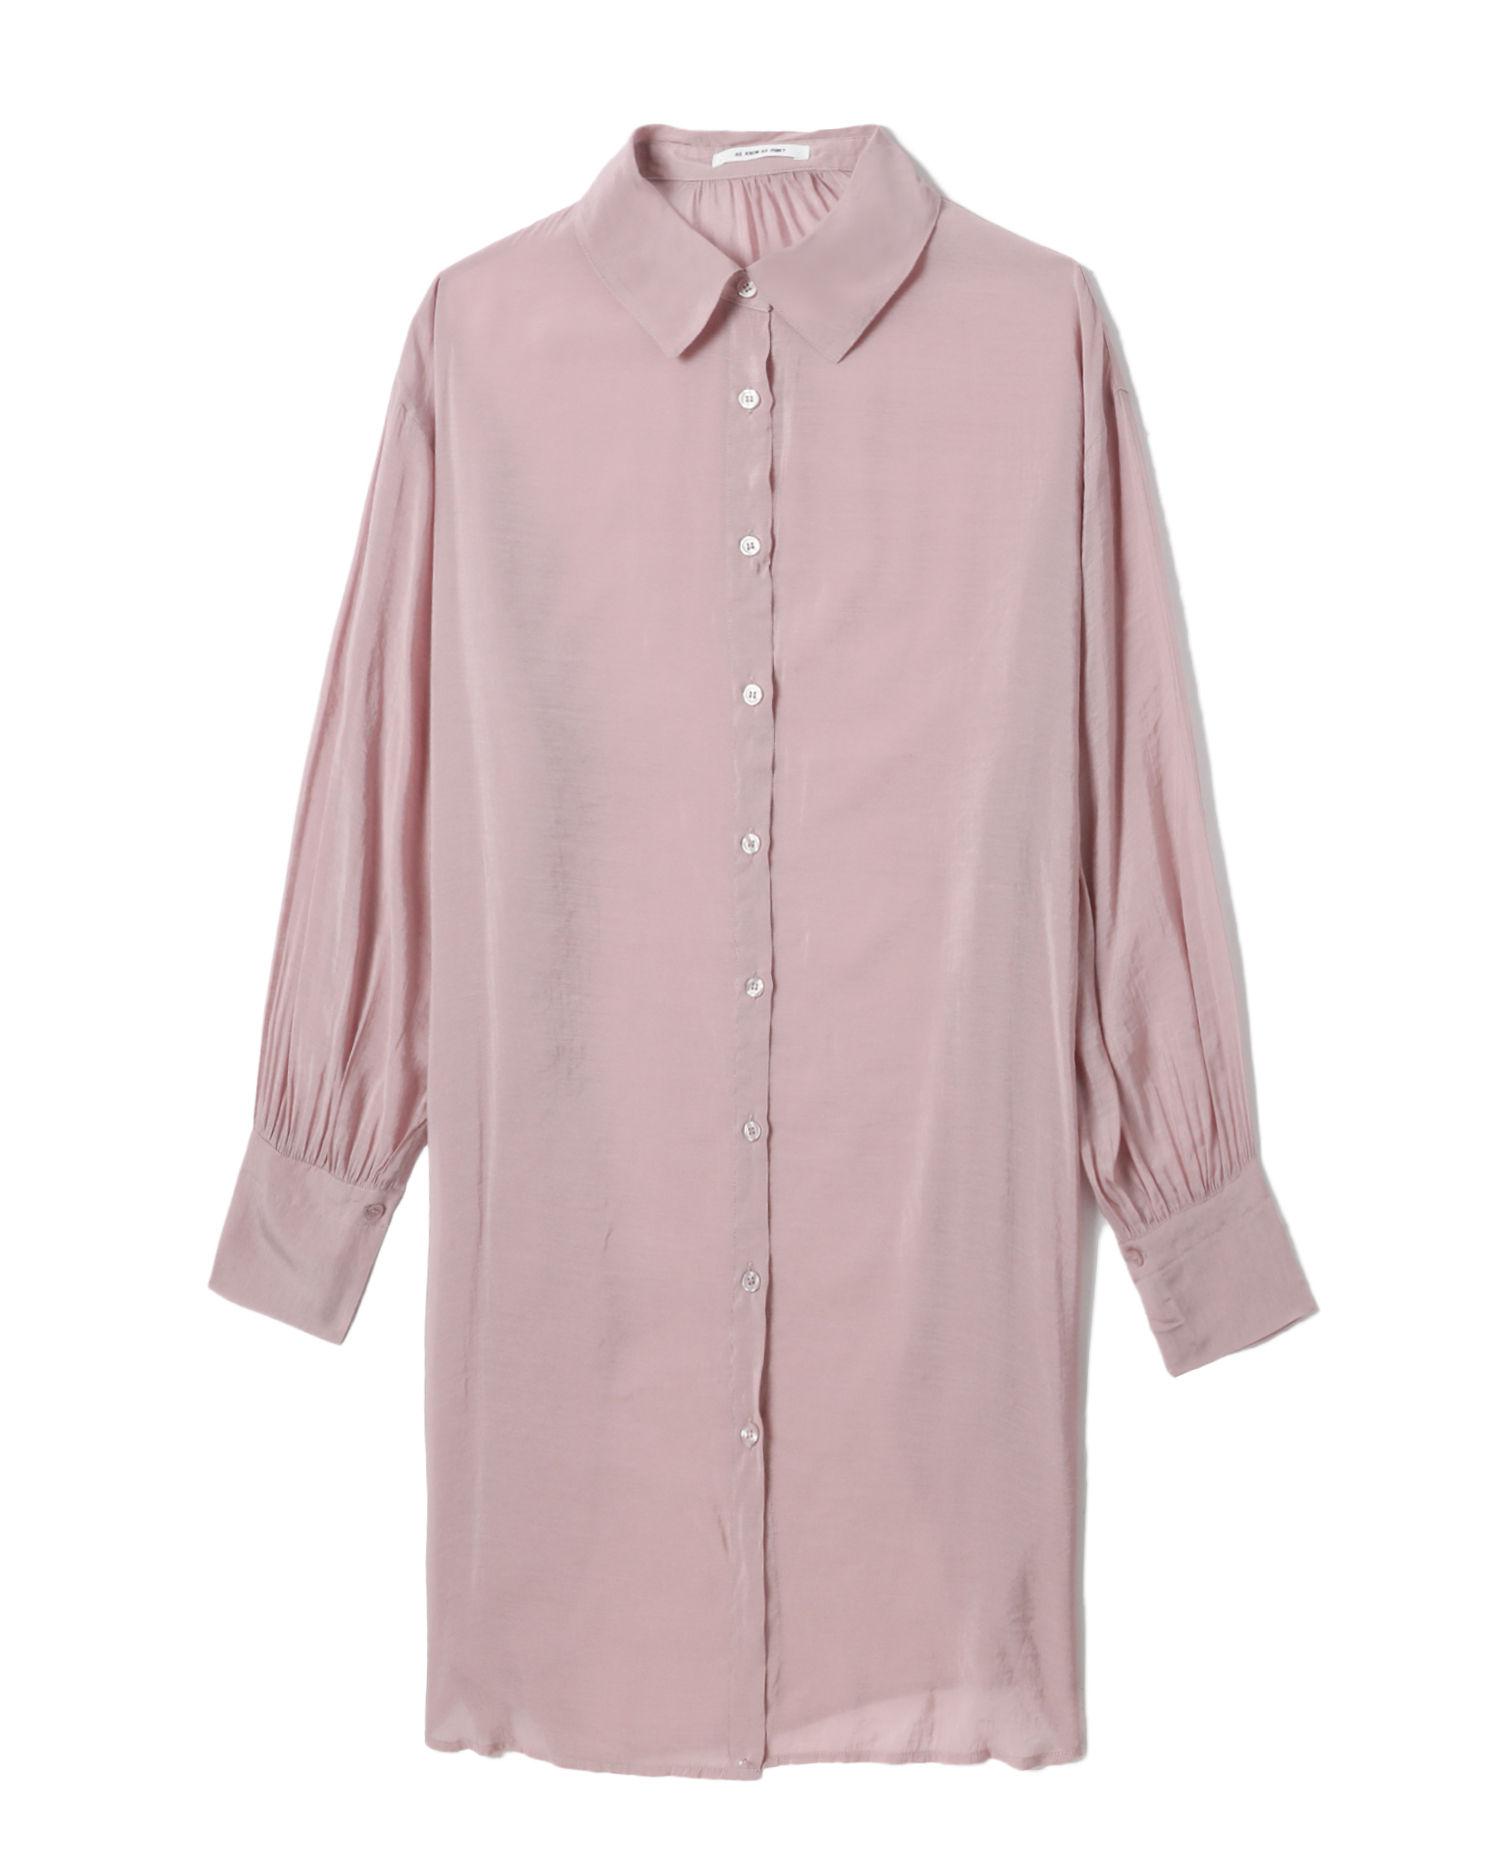 Elongated relaxed shirt by AS KNOW AS PINKY